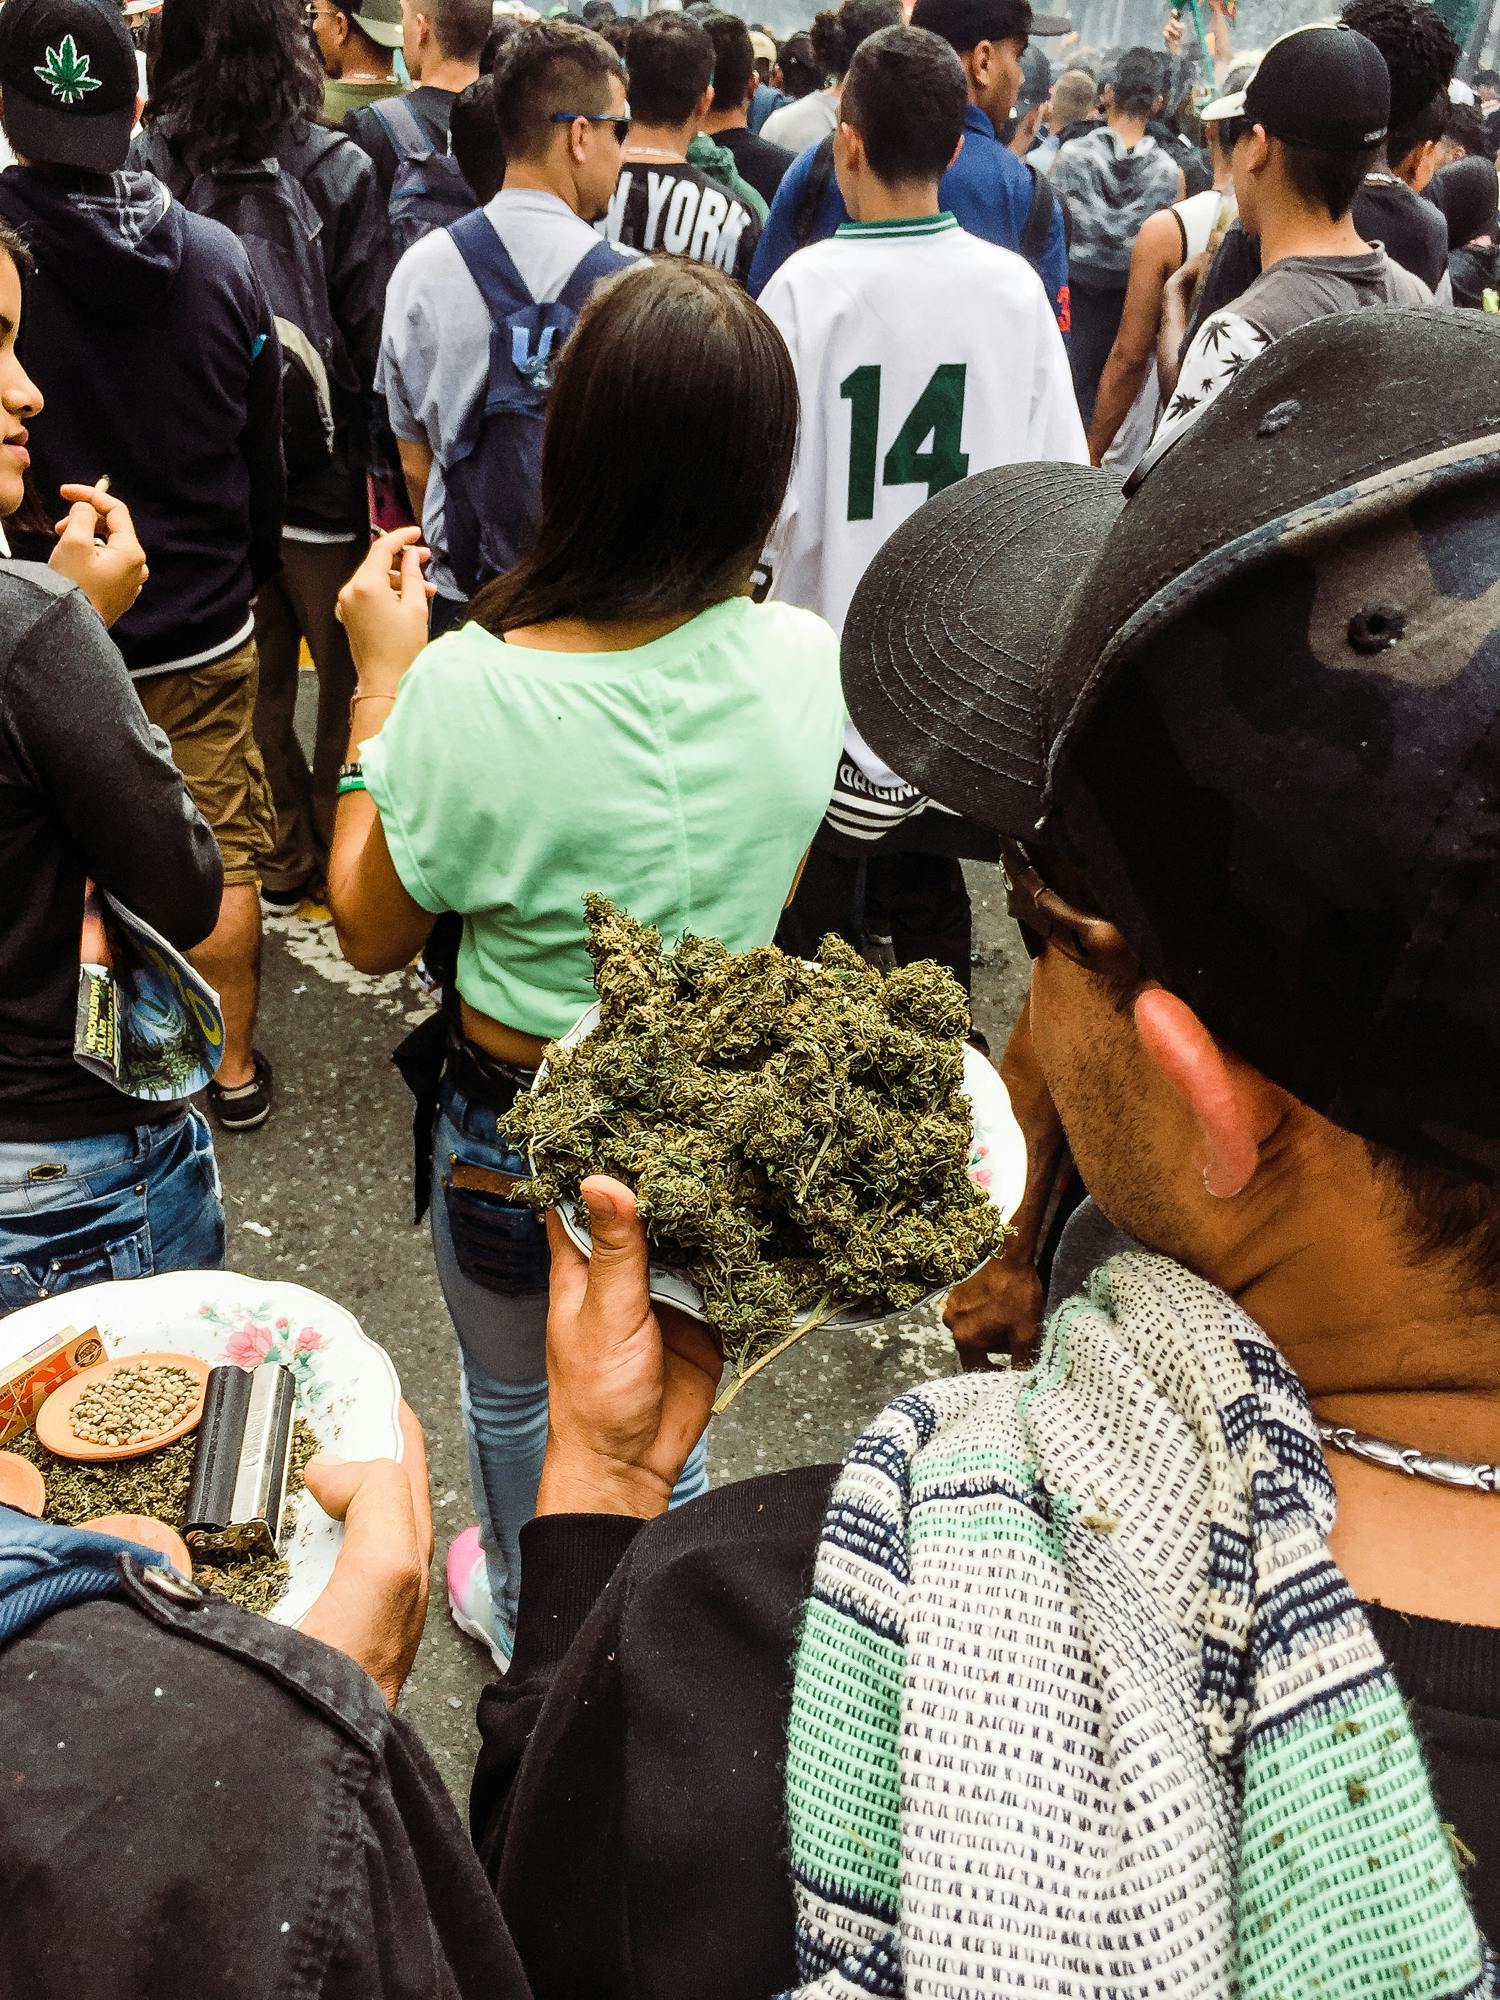 IMG 0576 We marched with 100,000 people in Colombia for cannabis reform